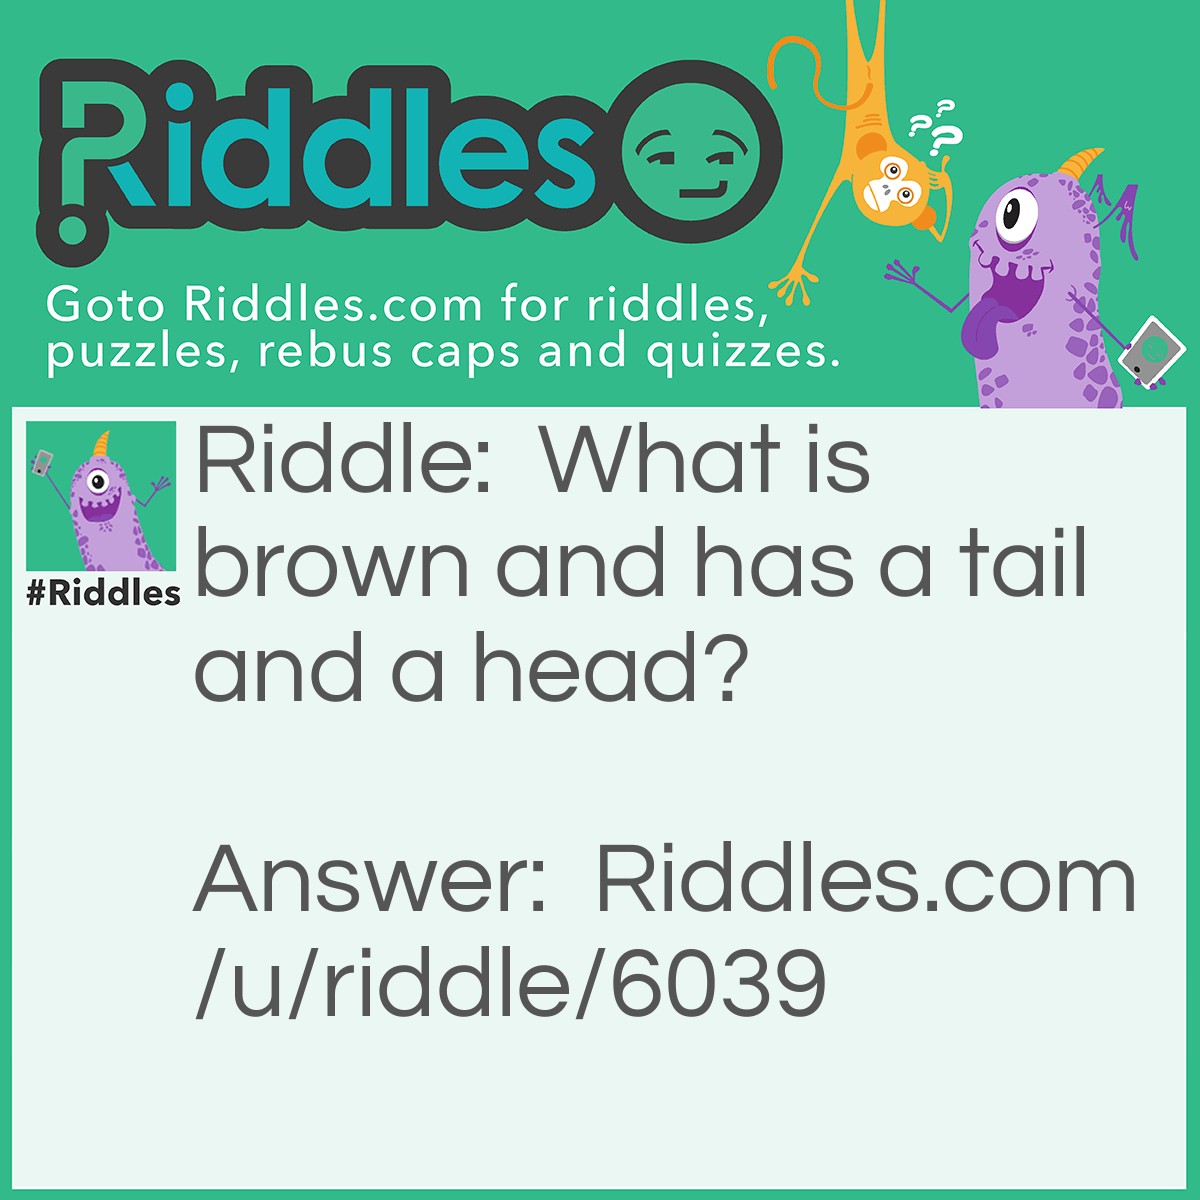 Riddle: What is brown and has a tail and a head? Answer: A penny